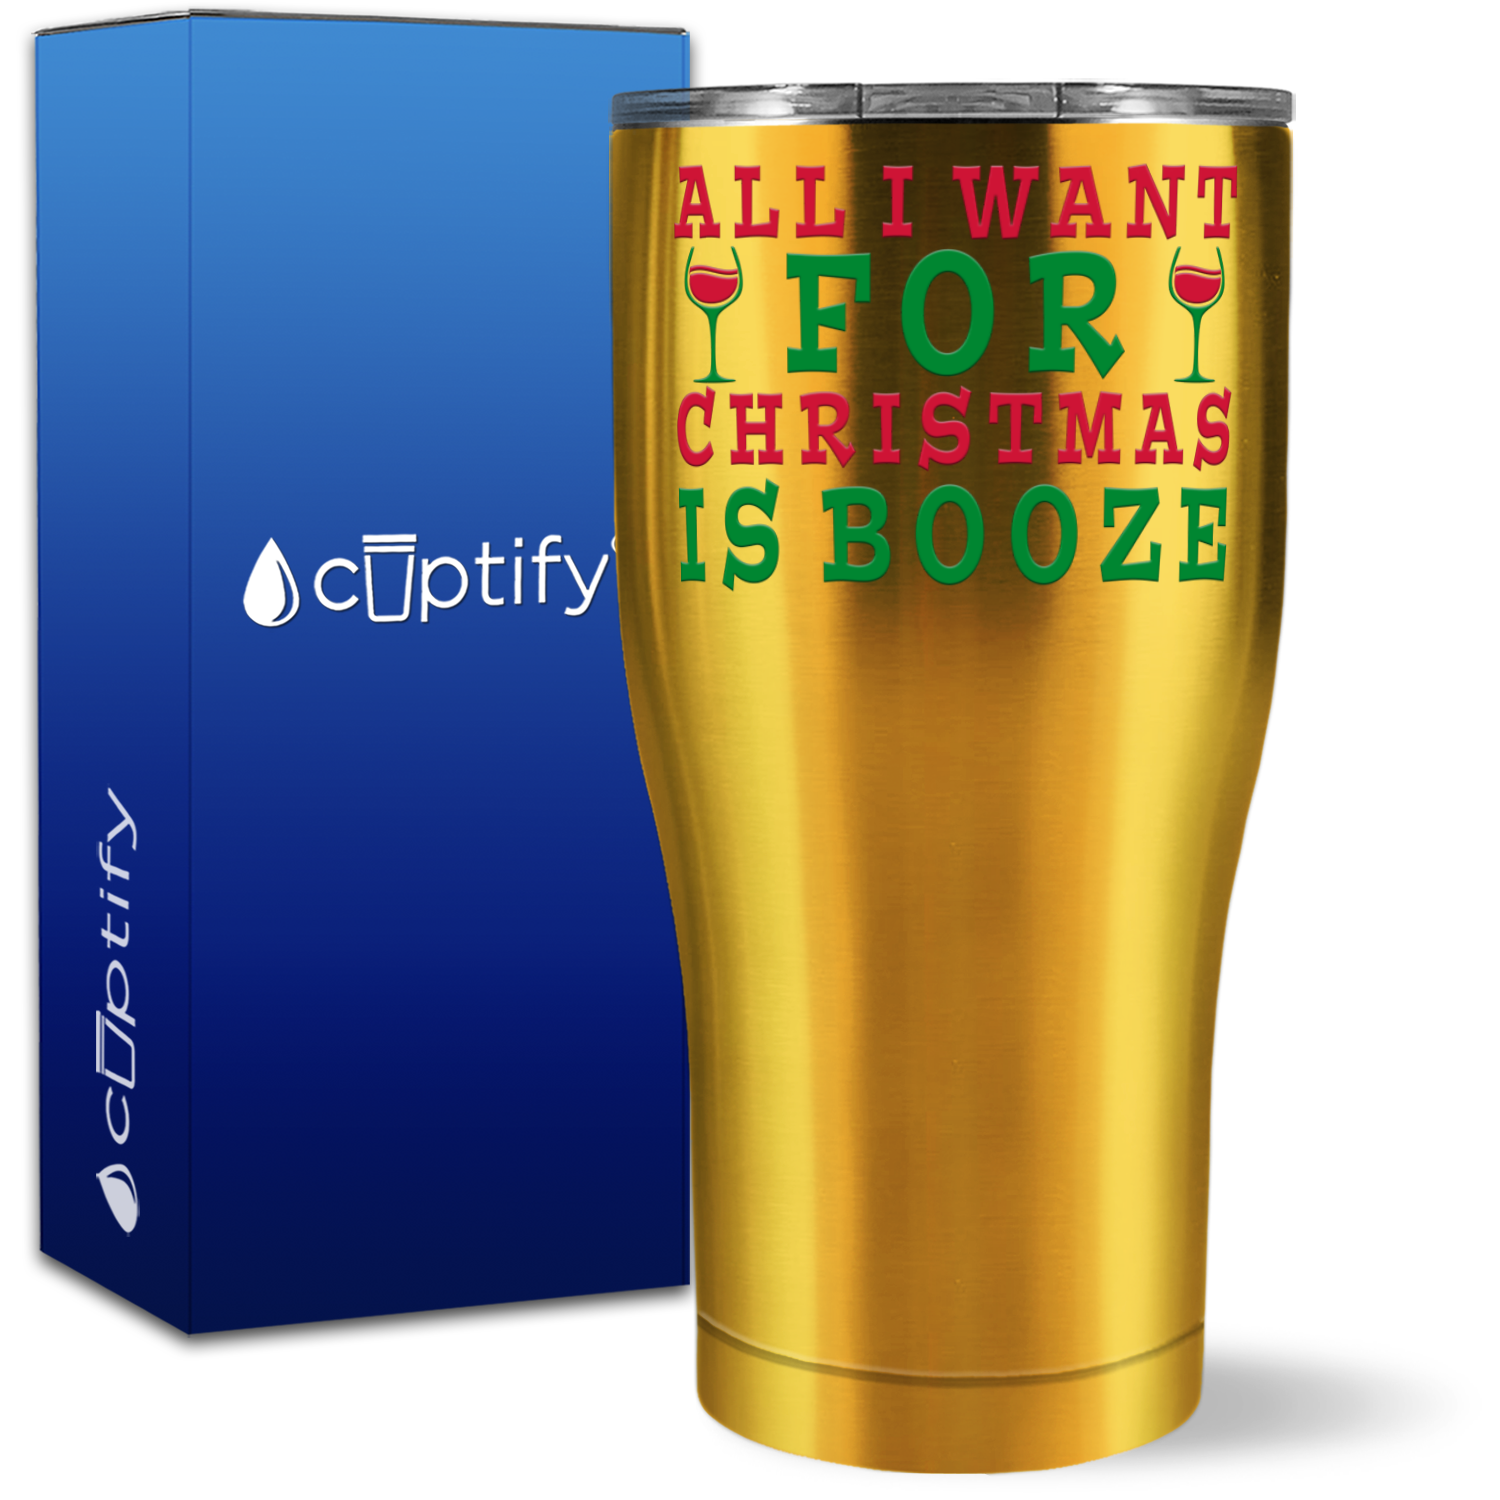 All I Want for Christmas is Booze 27oz Curve Tumbler